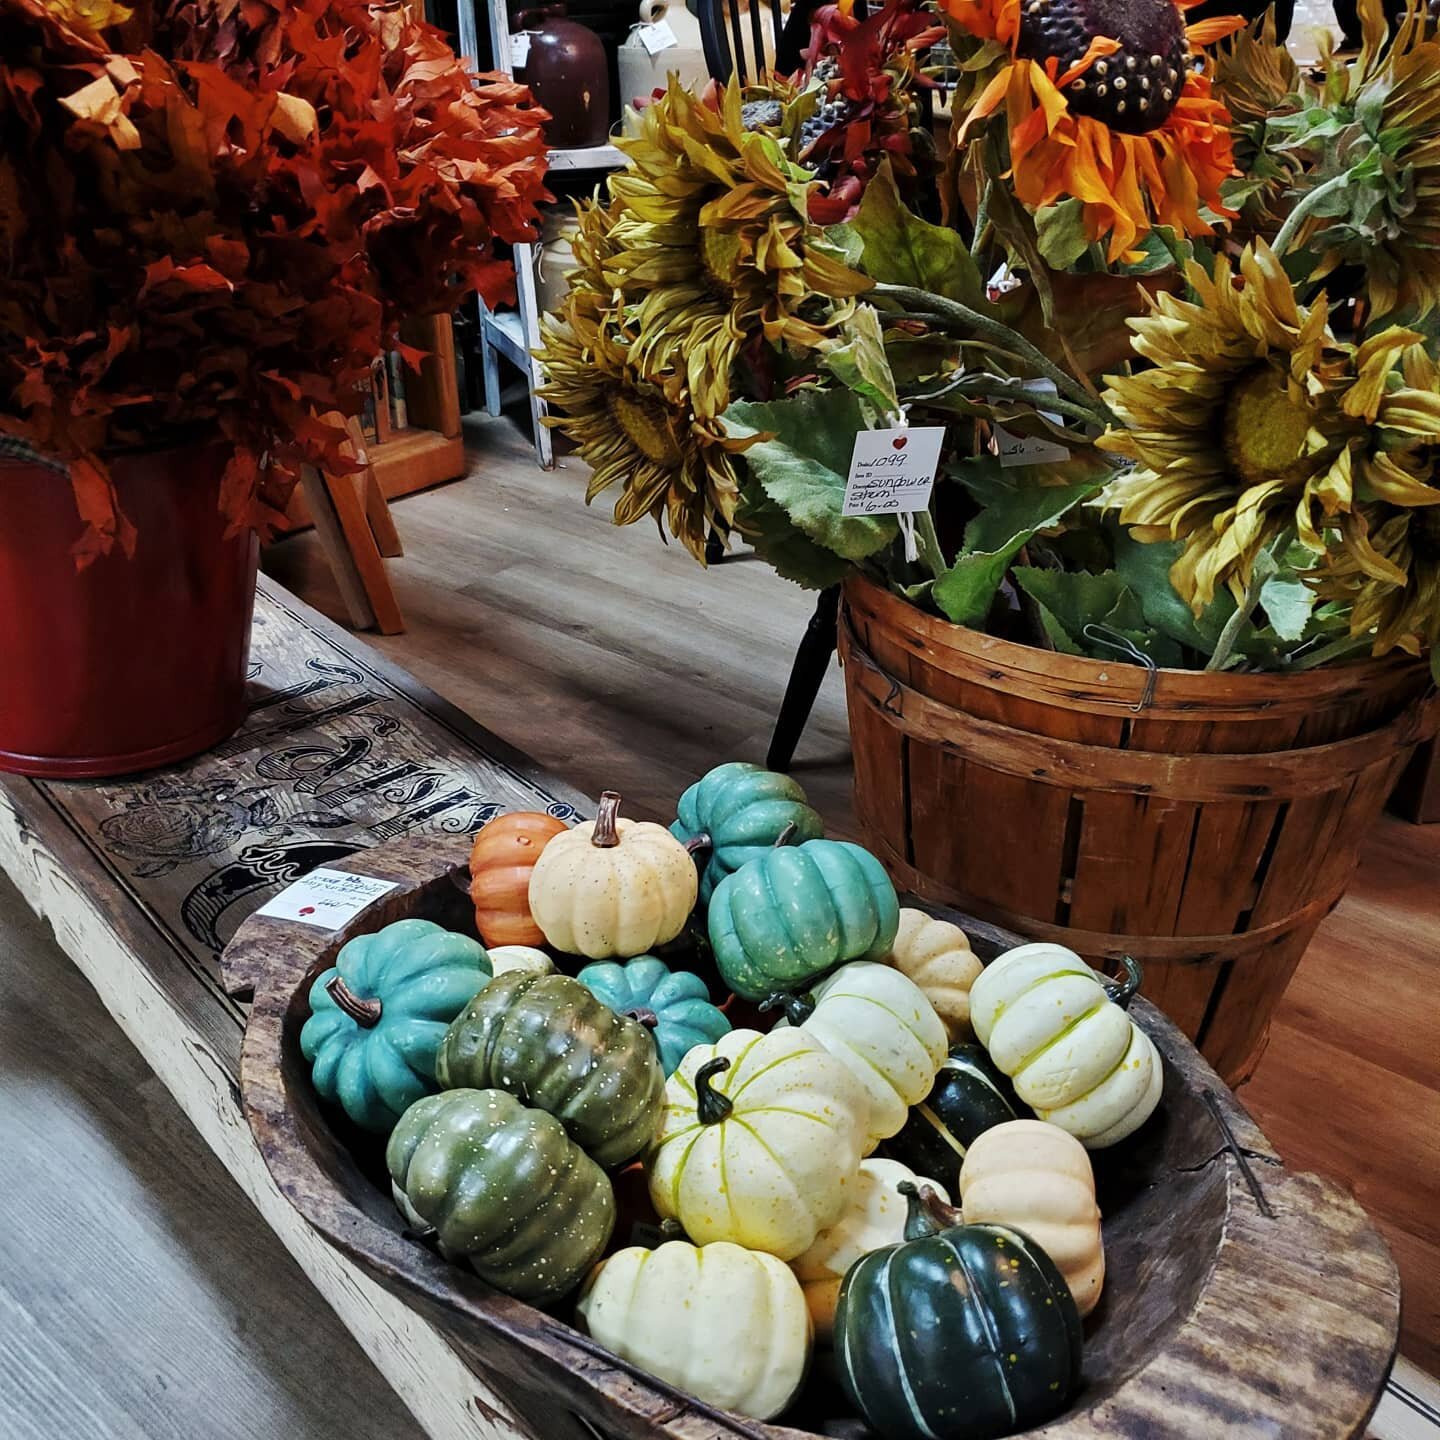 Nothing says autumn like colorful leaves, sunflowers, and pumpkins! Does it get any better than this? If you need me, I'll be sitting in the middle of this booth all day. 🤫

#sunflowers #fallleaves #pumpkins #falldecor #seasonaldecor #earthinspiredh